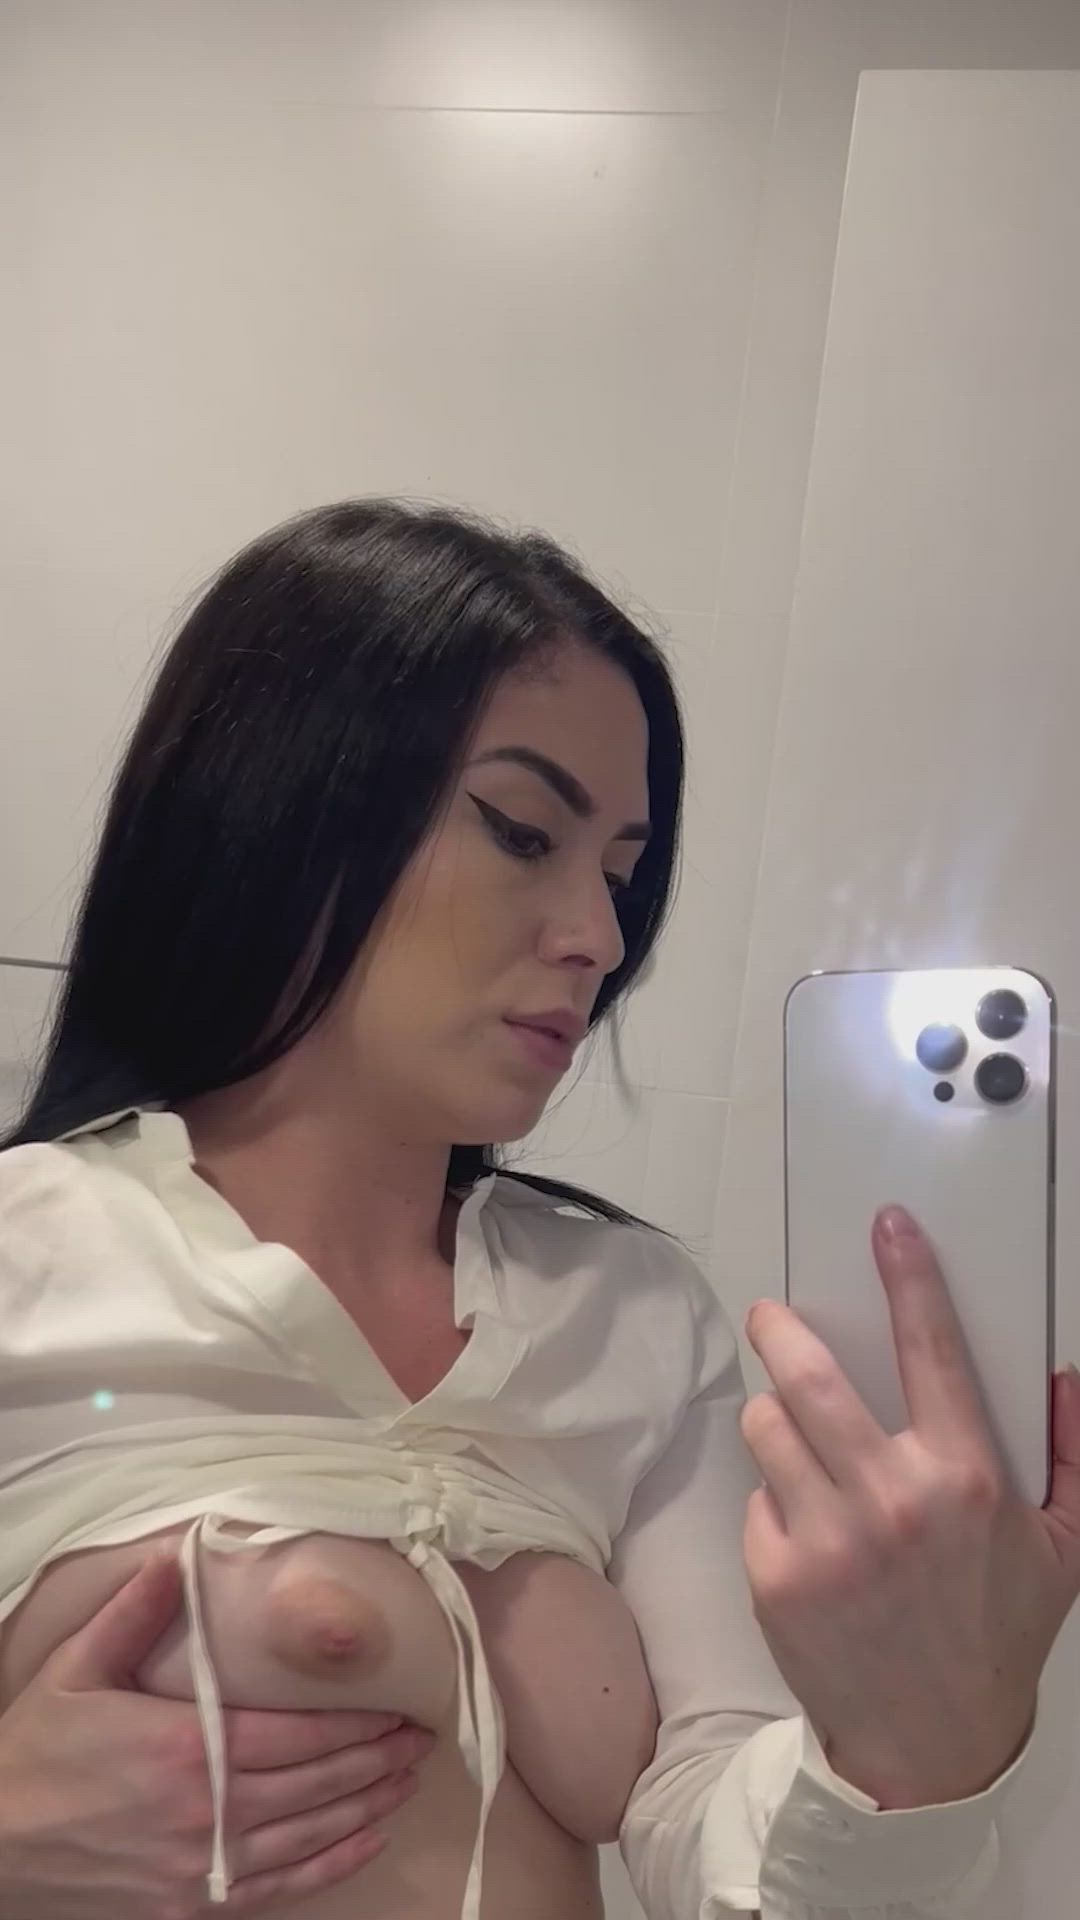 Tits porn video with onlyfans model vivimatos <strong>@matosvivi</strong>